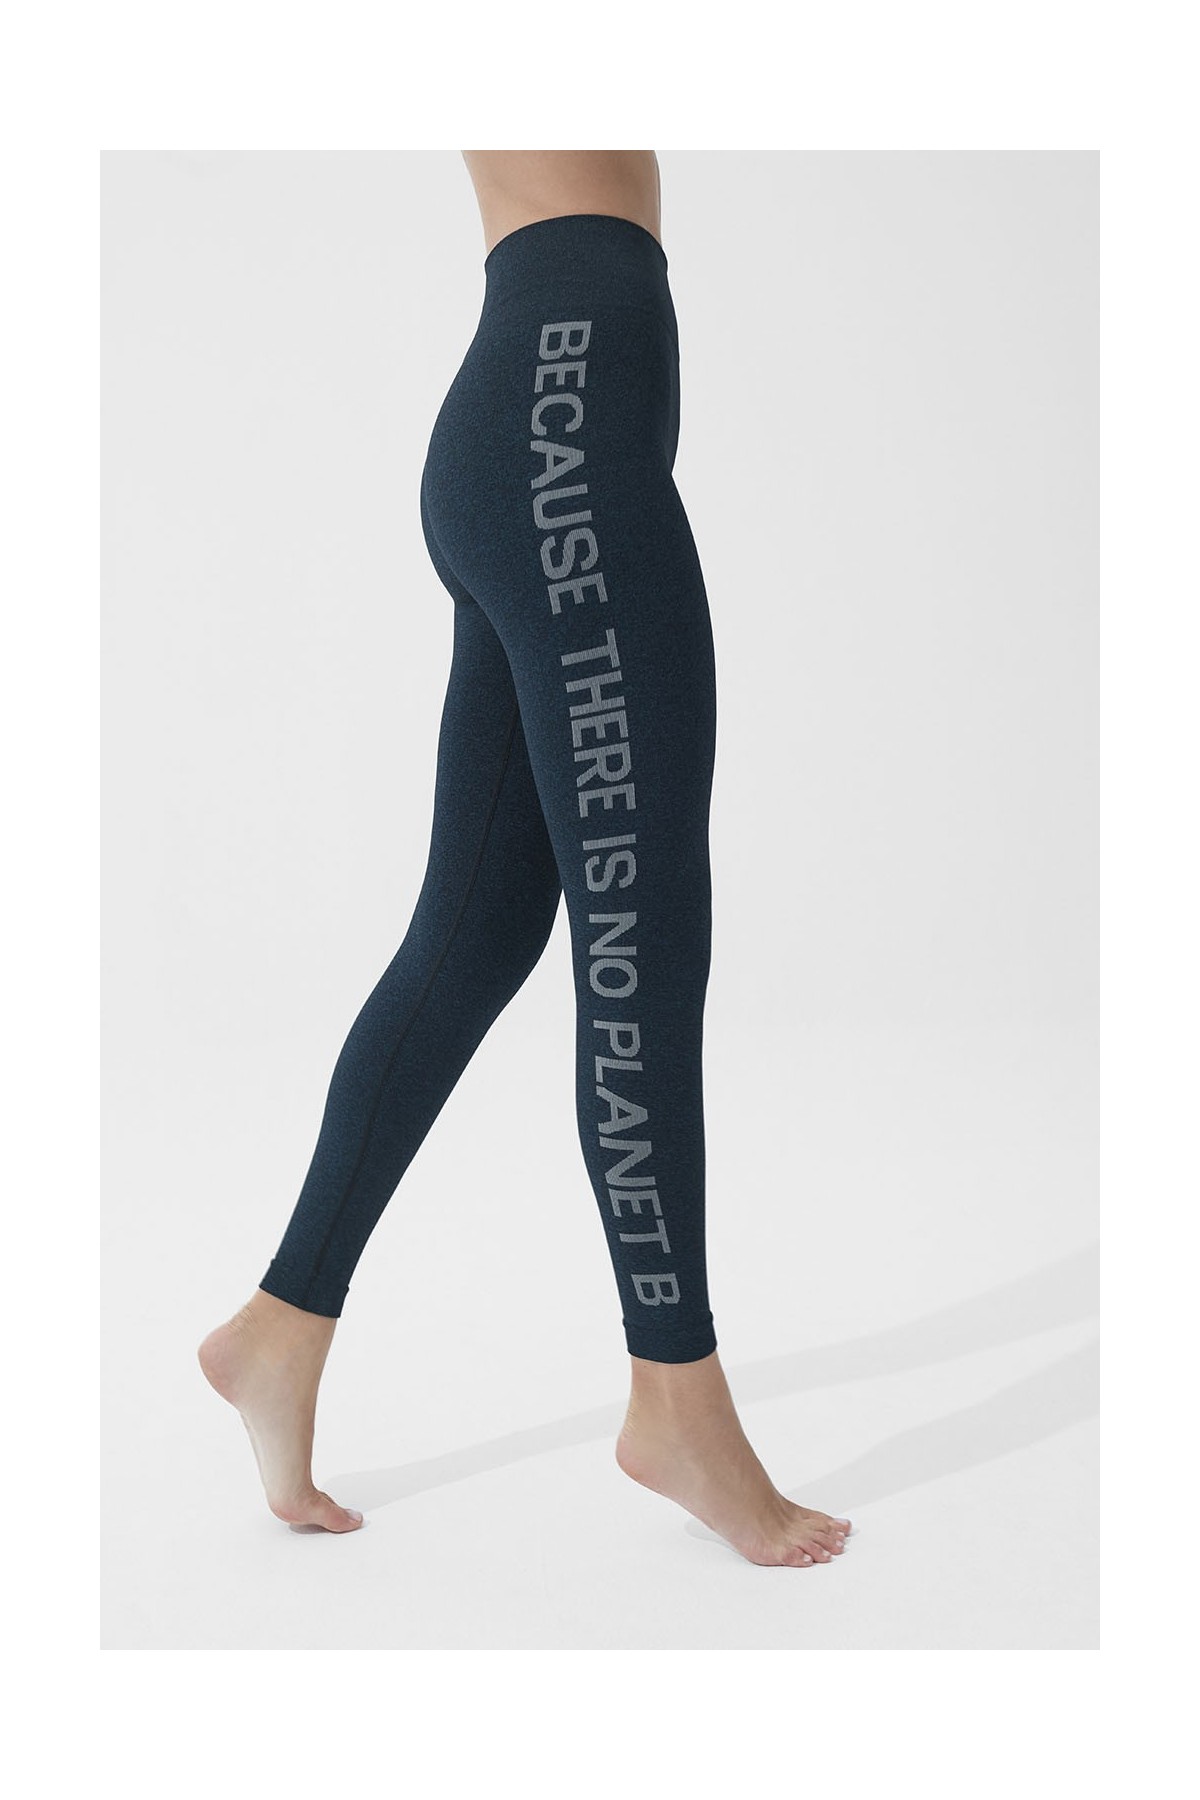 Ethical and Sustainable: Finding Fair Produced Leggings for Yoga and P